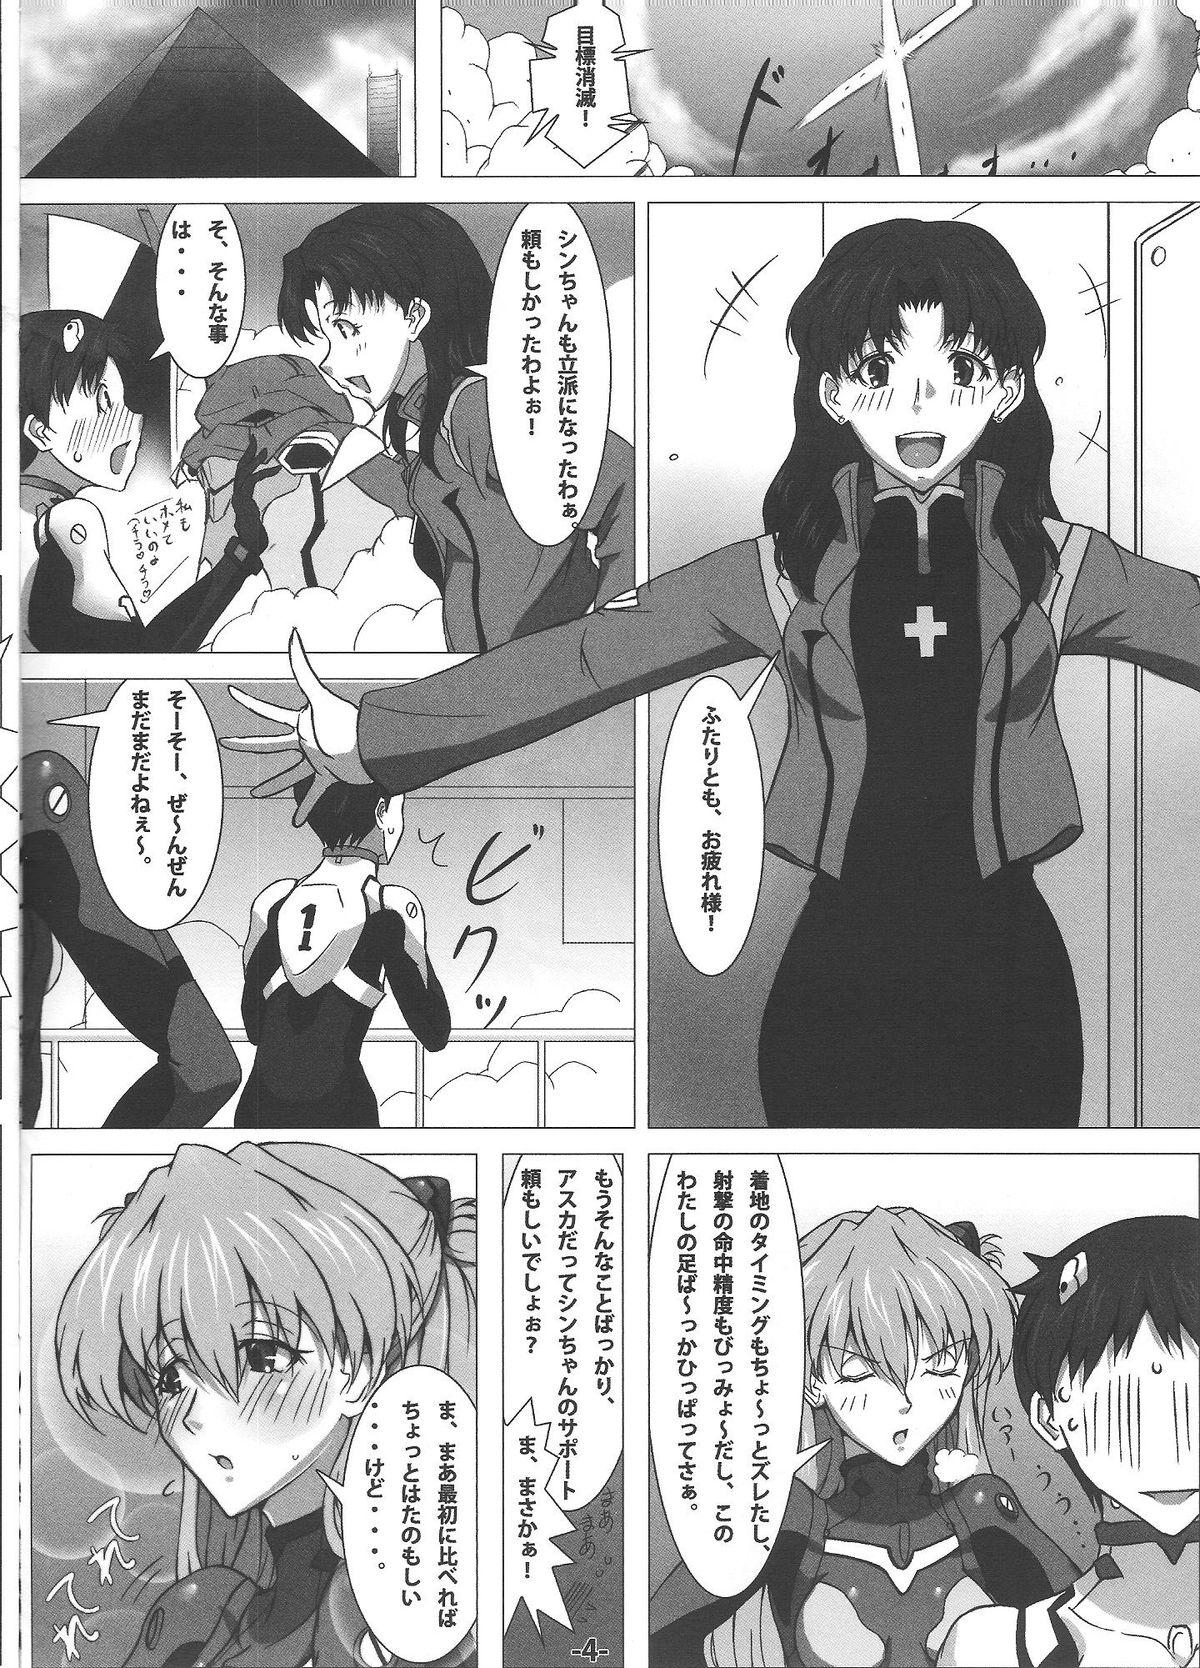 Harcore Synchro Rate 200% !! - Neon genesis evangelion Culos - Page 5